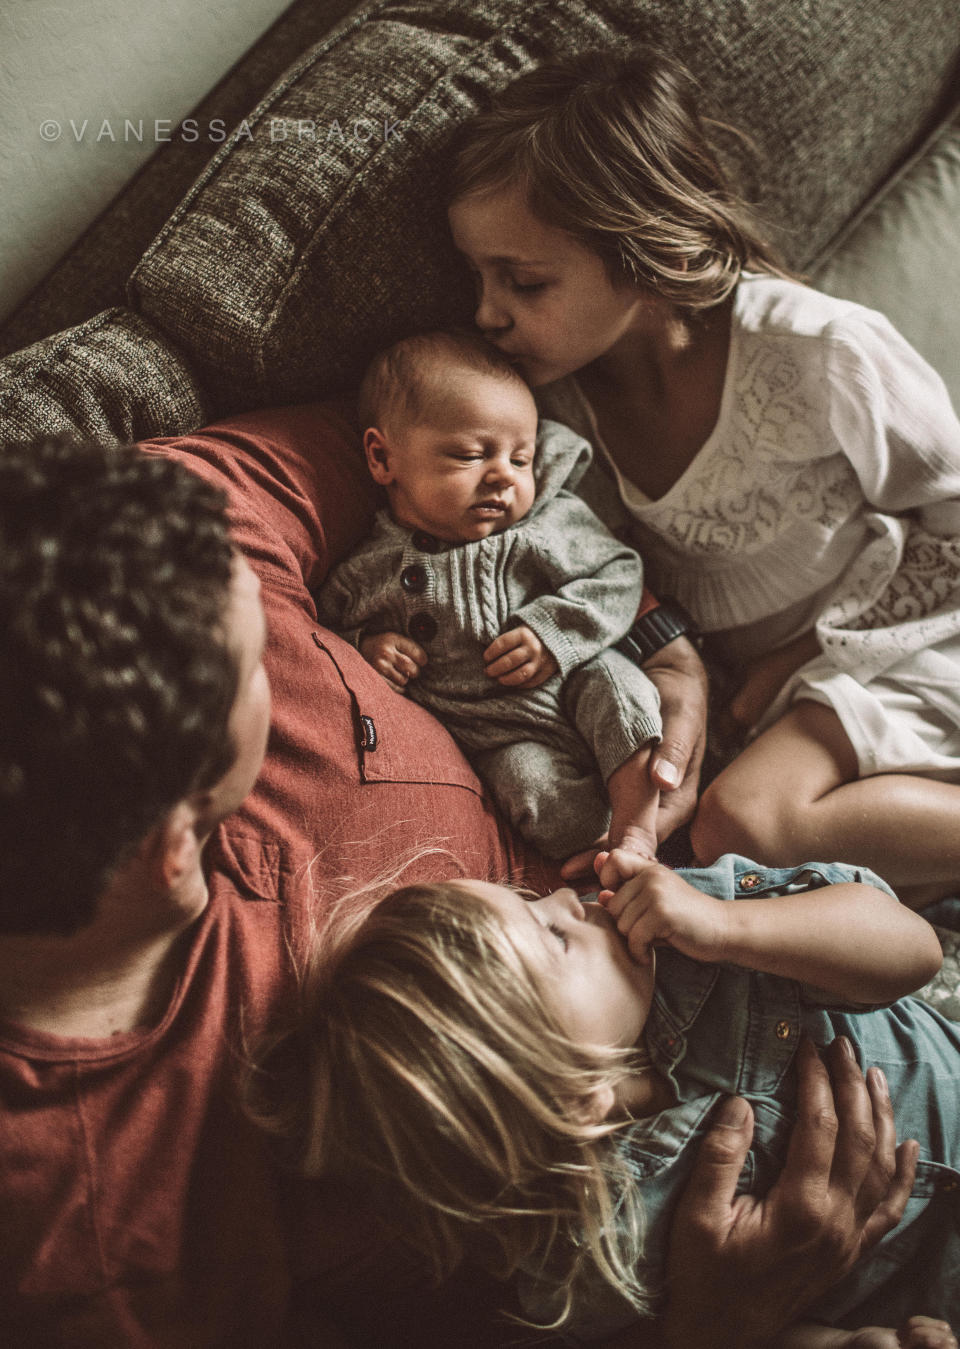 "This dad snuggles with his girls as they welcome and get to know their new baby brother."